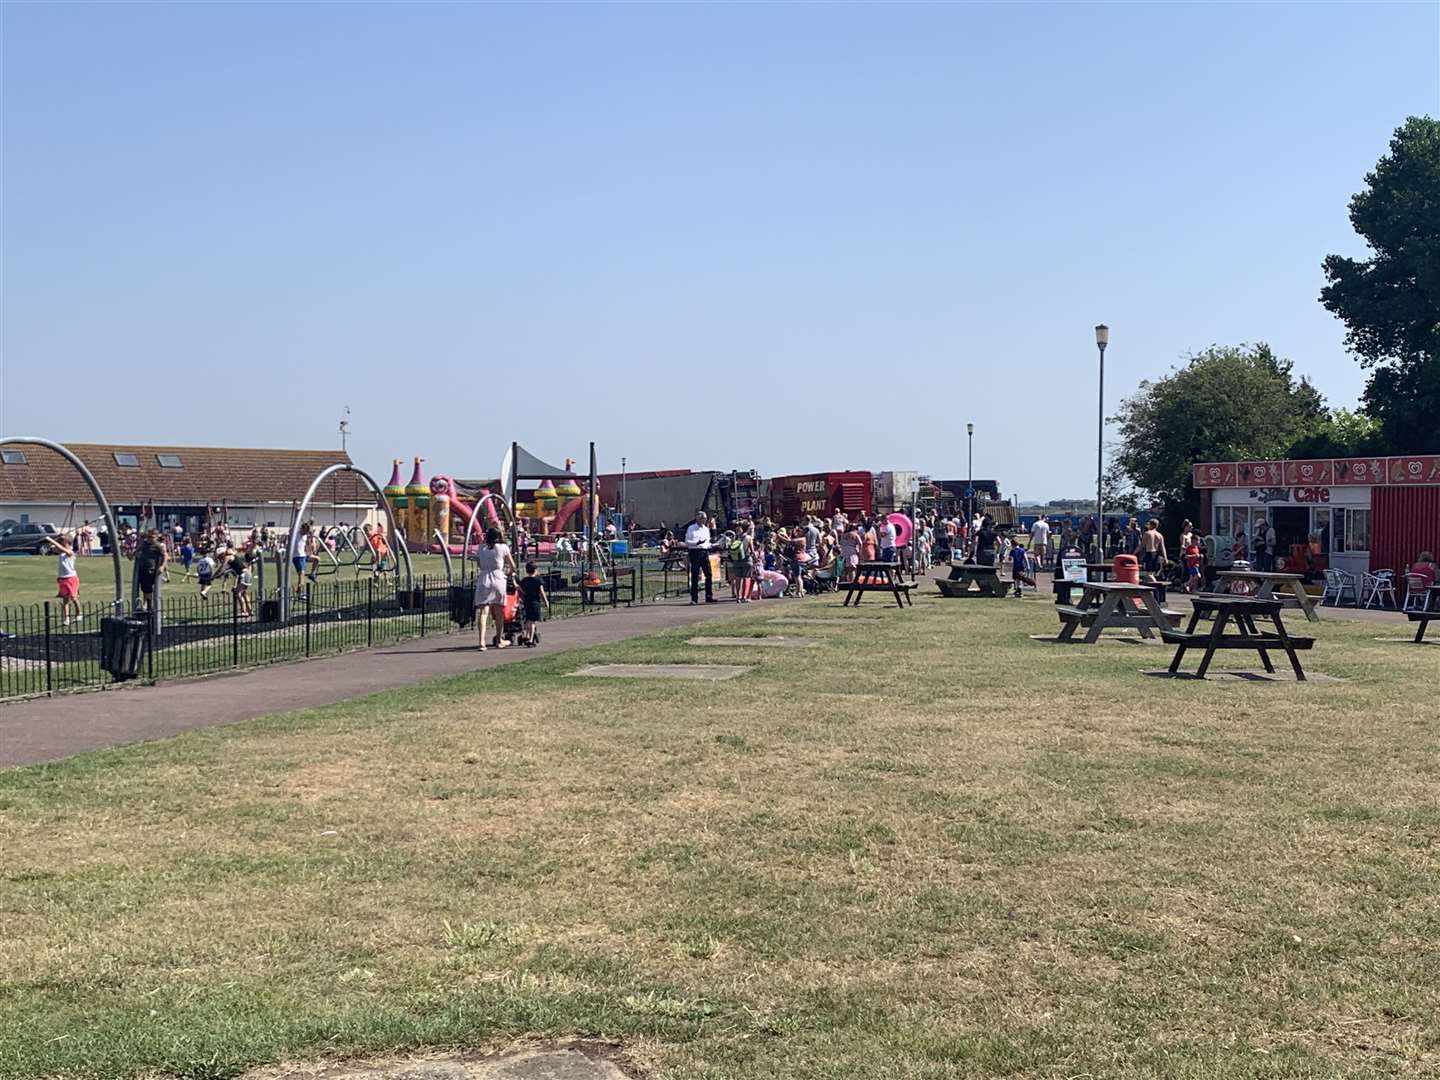 Queues are building at the Strand in Pier Approach, Gillingham, on Wednesday, July 24 (14228024)